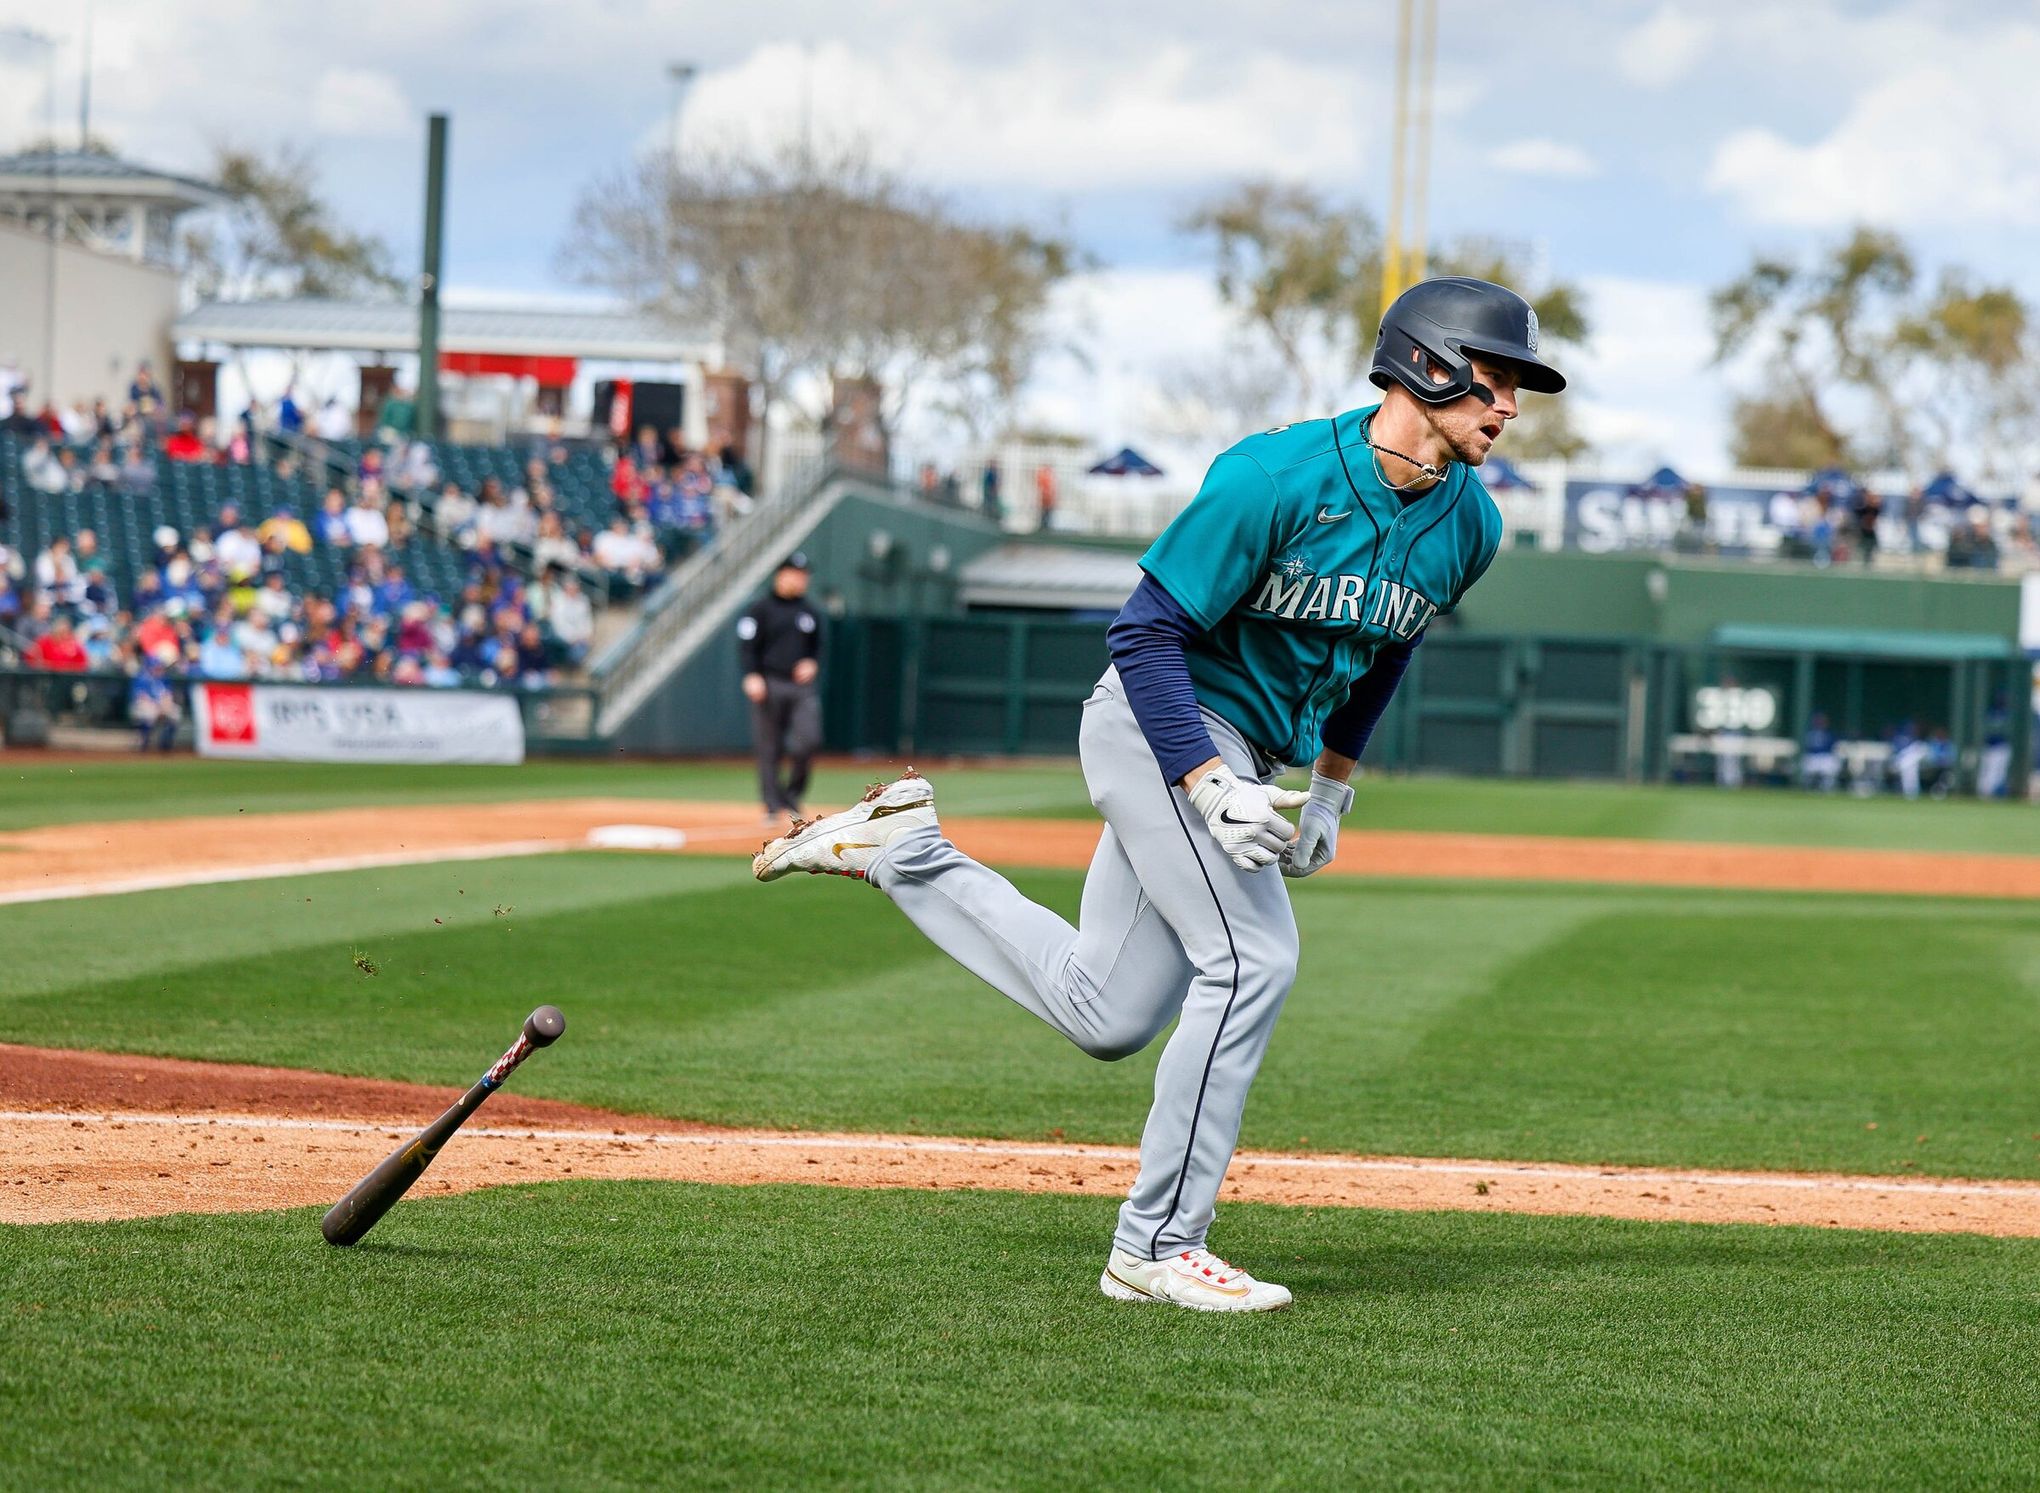 Mariners Spring Training: The 5 coldest bats right now